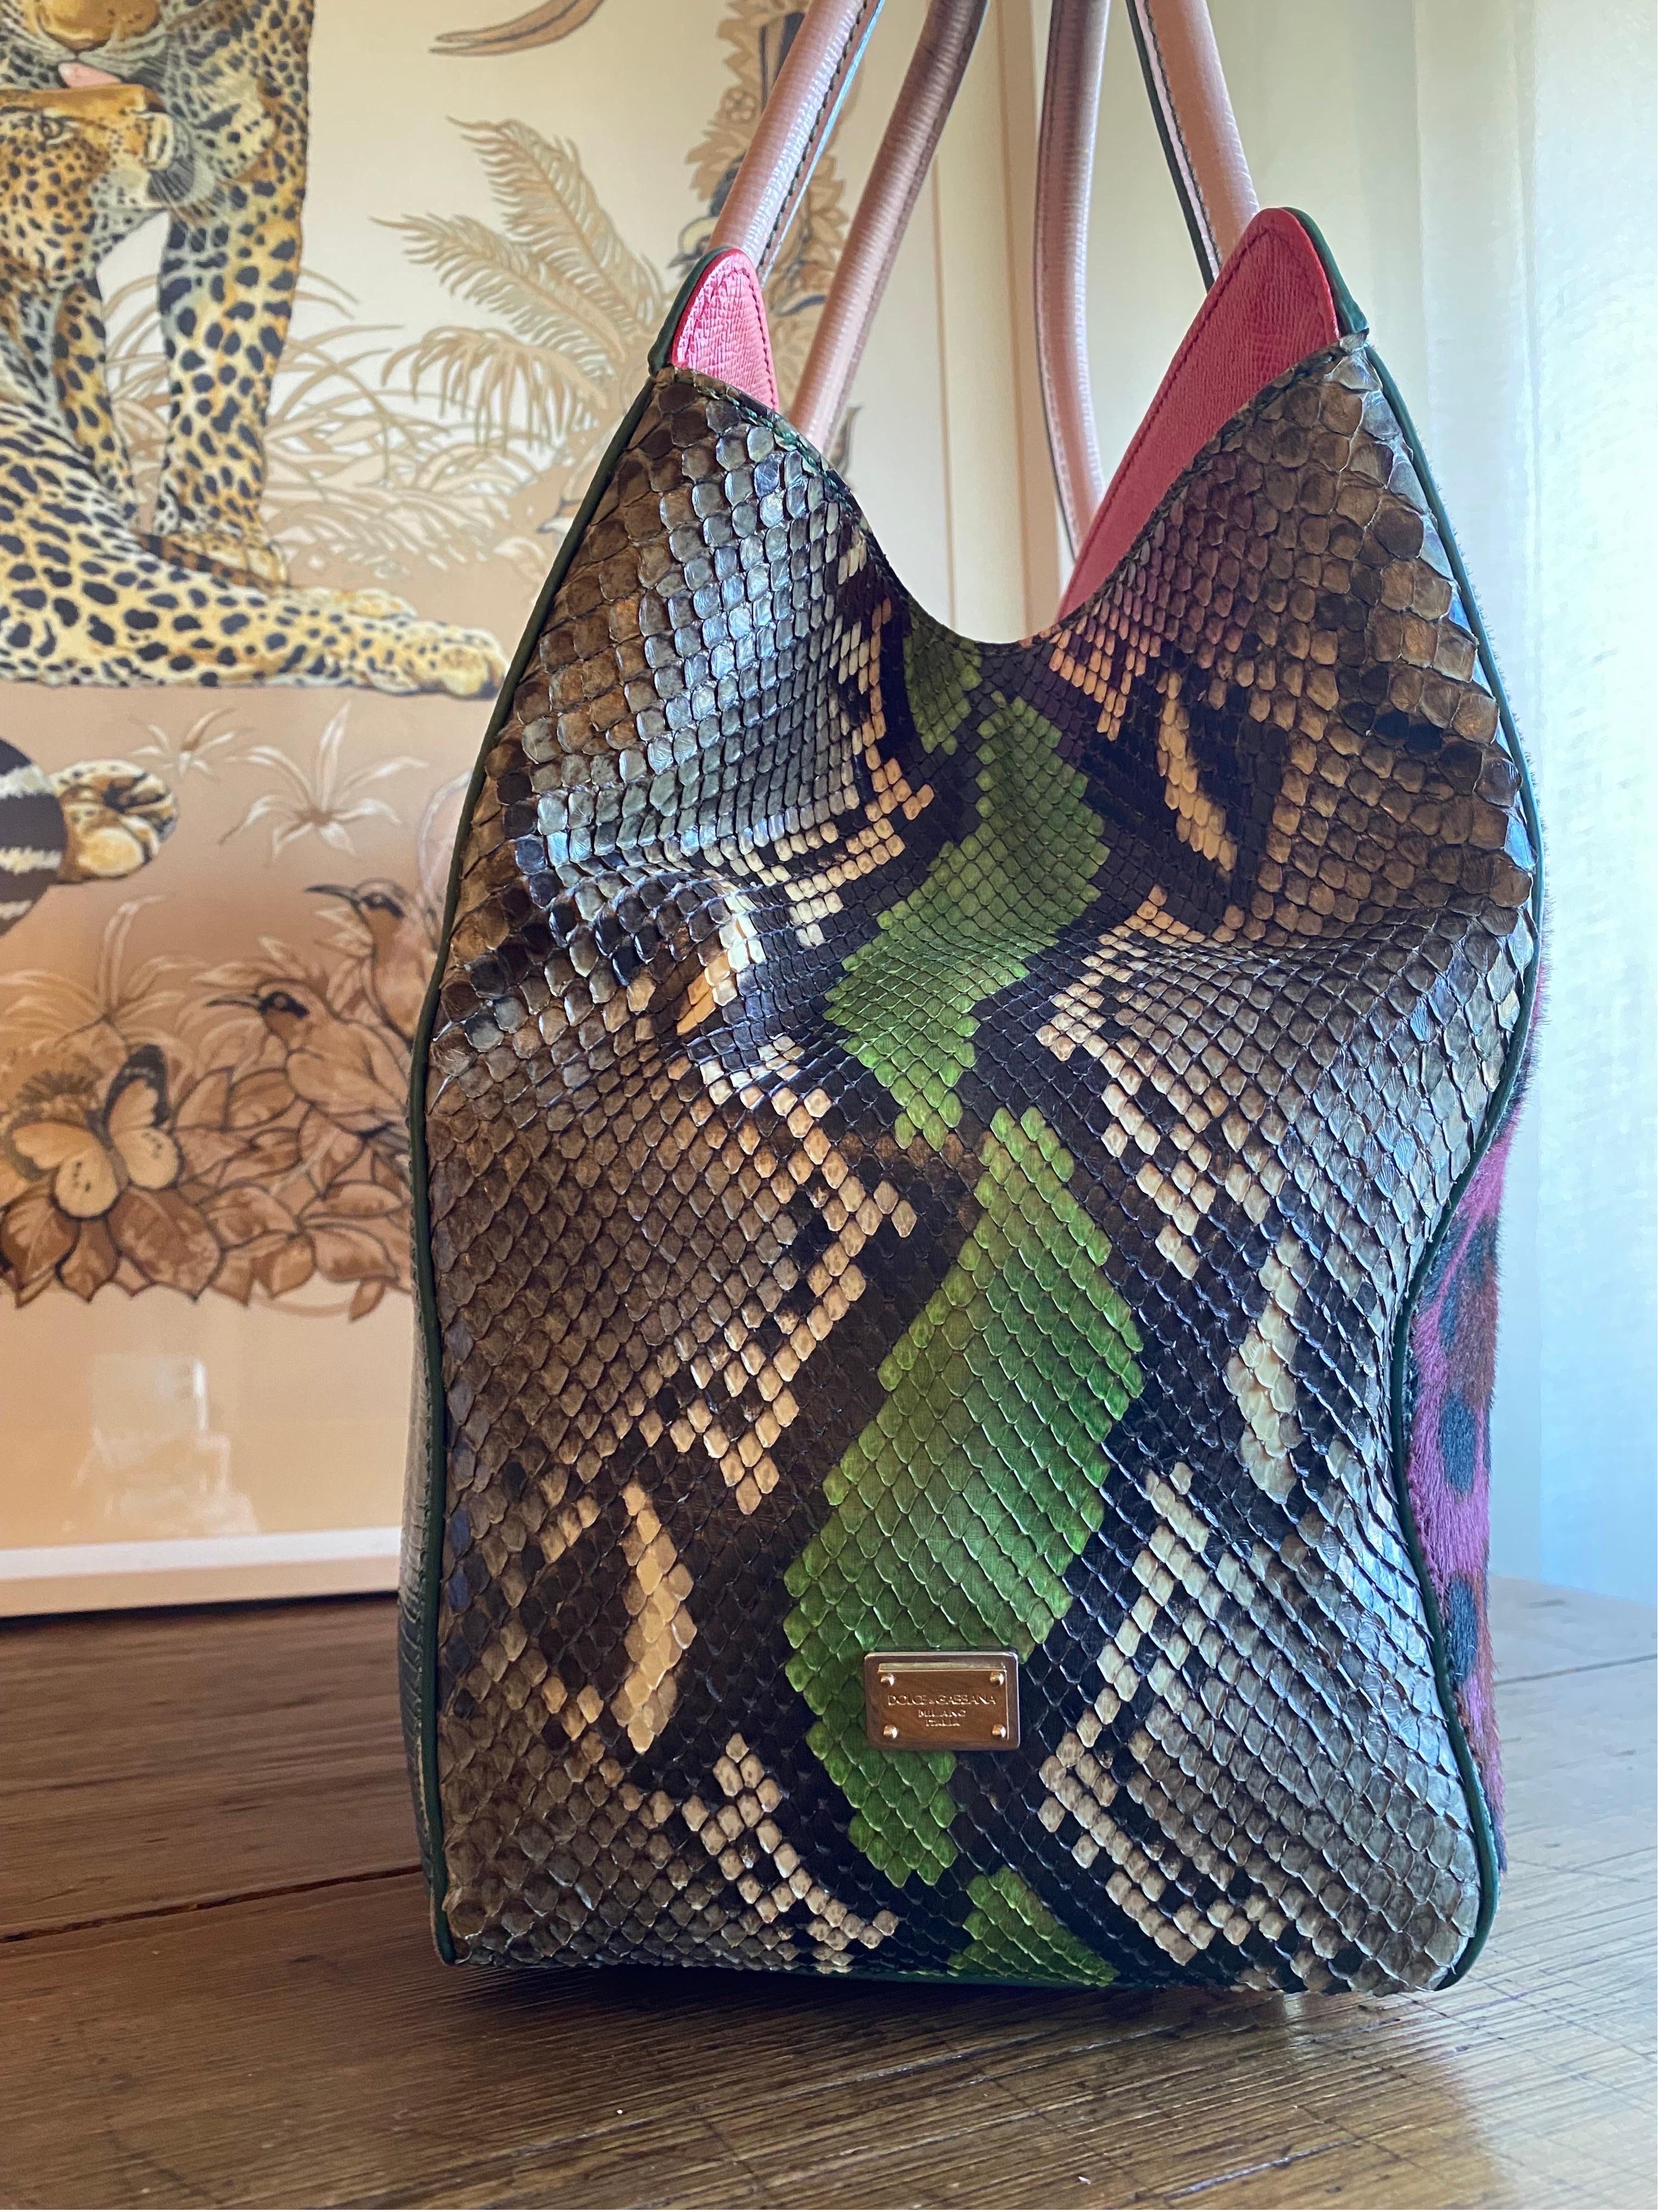 Particular Dolce & Gabbana bag to be worn on the shoulder or by hand. Made of pony skin in shades of dark pink on one side and with a blue reptile print on the other; the side portions are in colored python. The handles are in pink printed leather.